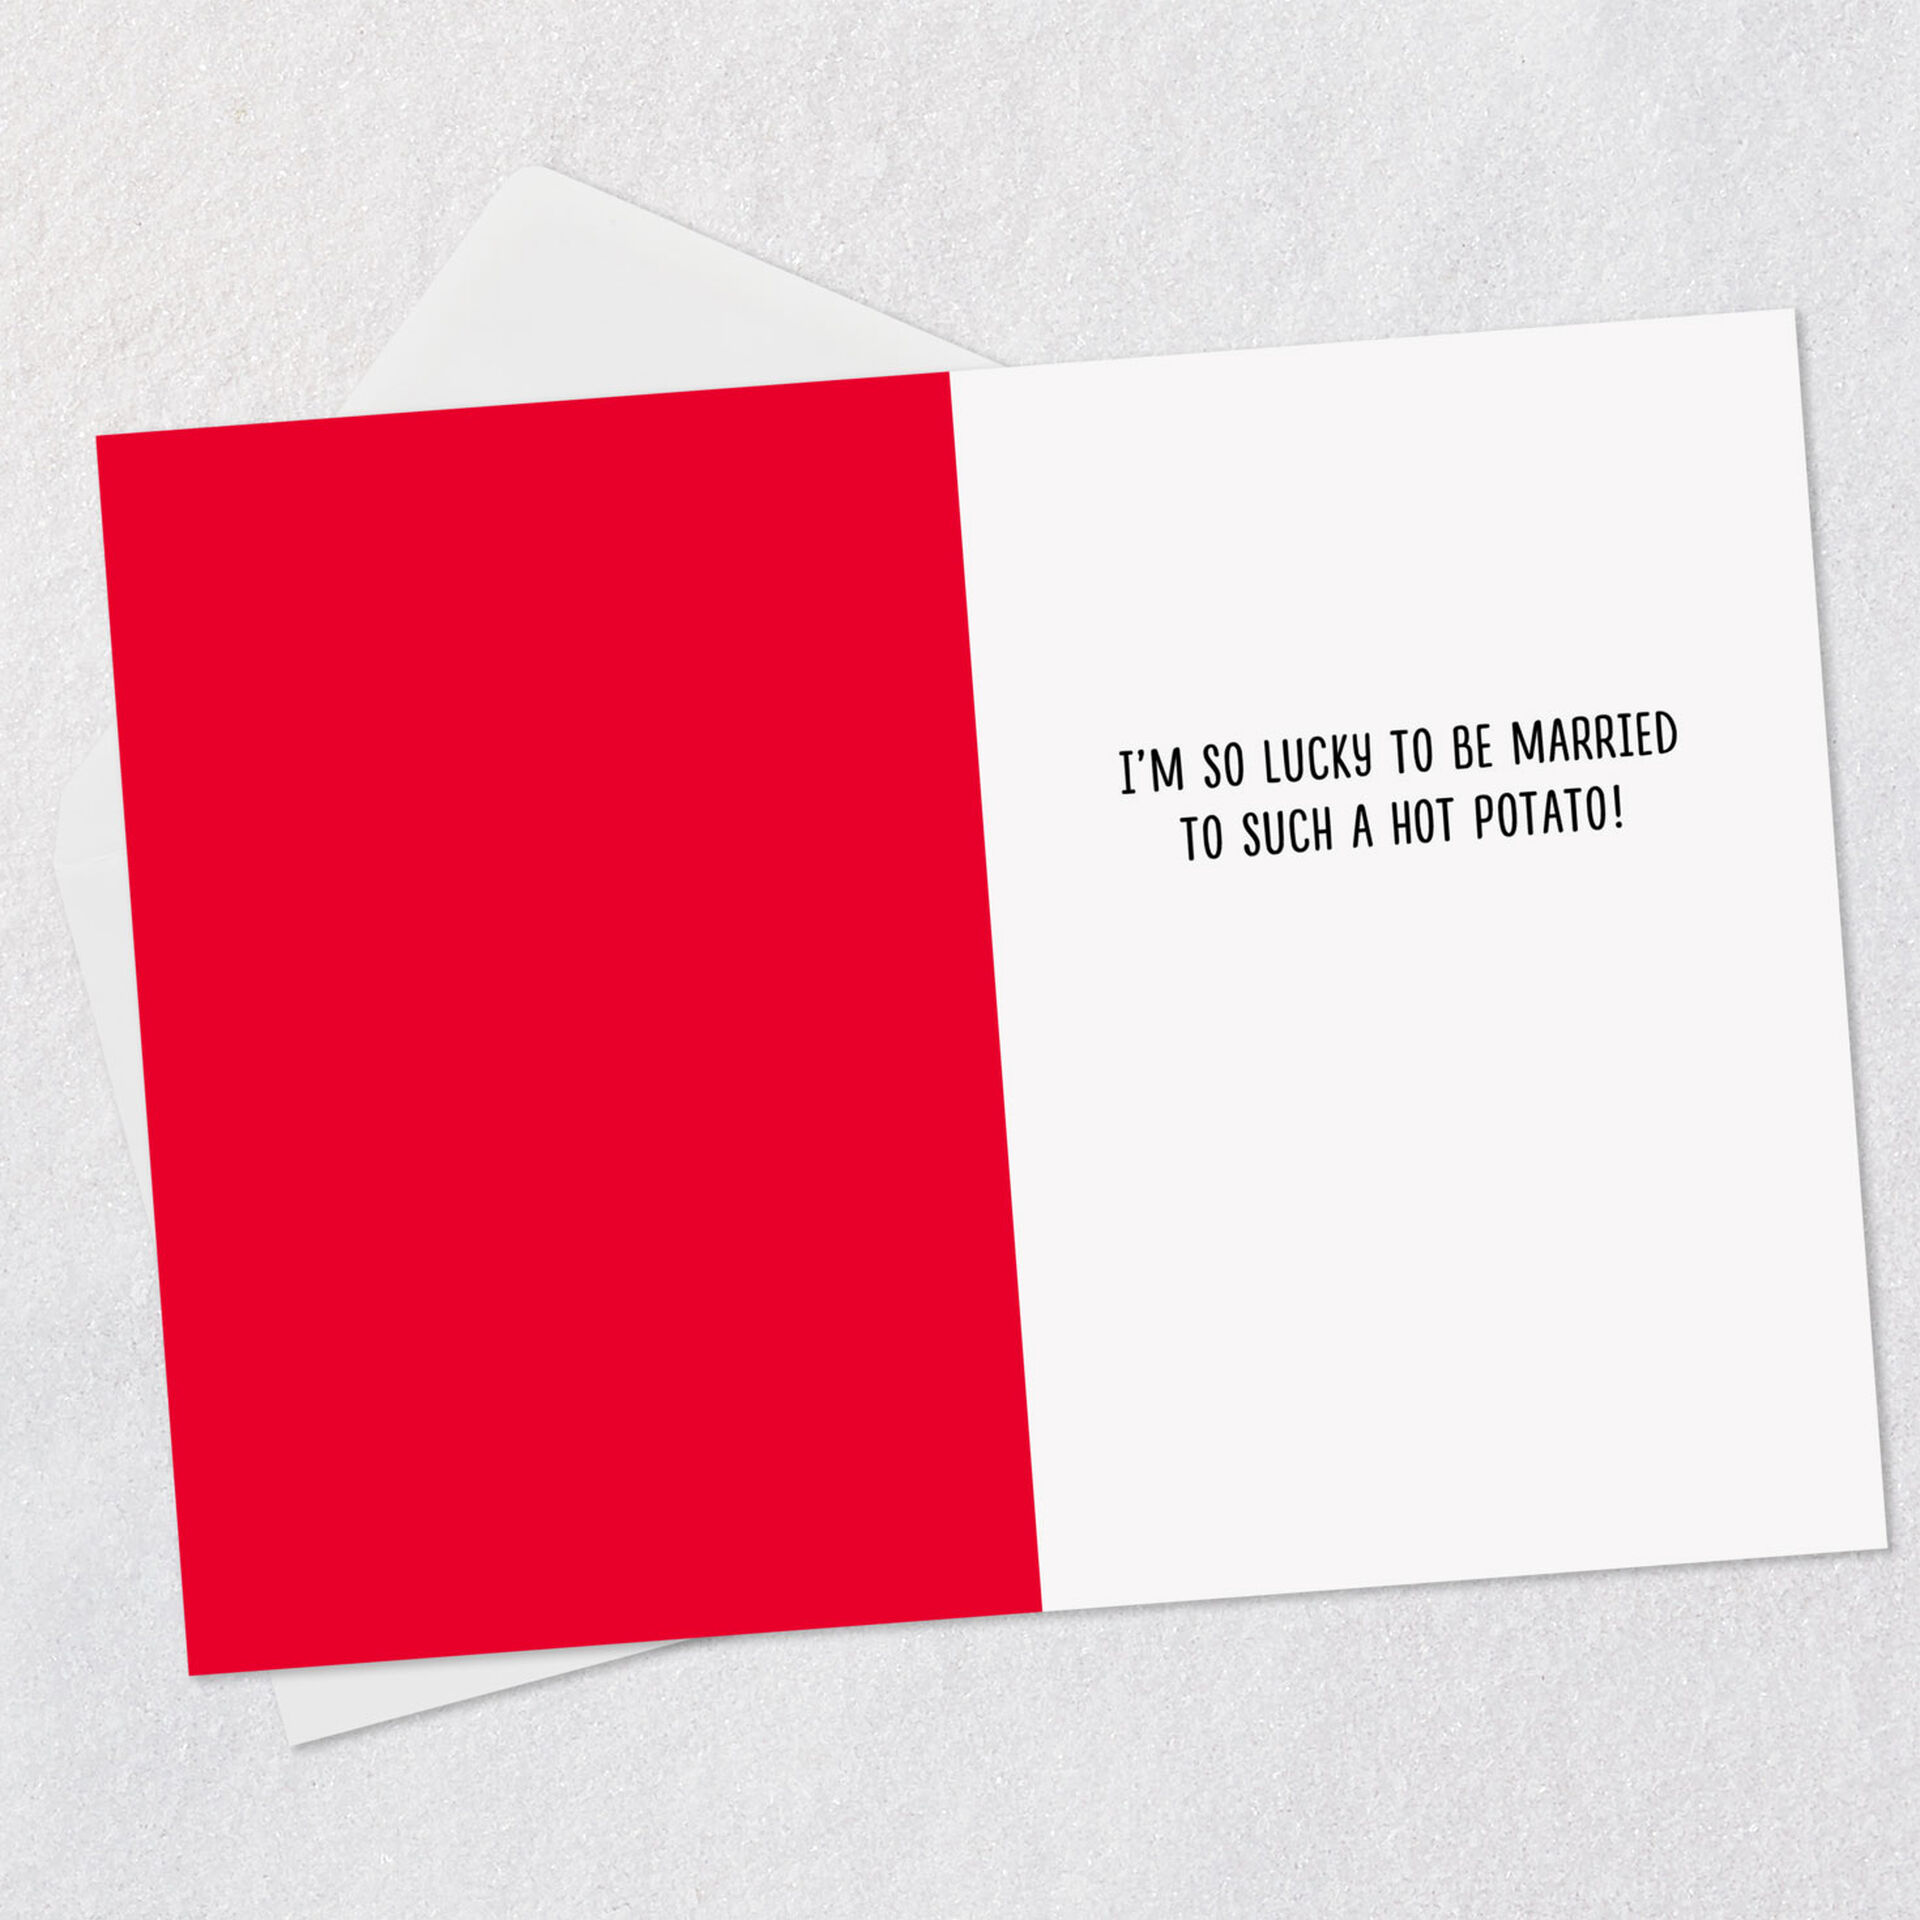 French-Fries-Pun-Funny-Love-Card-for-Spouse_369ZV5009_03